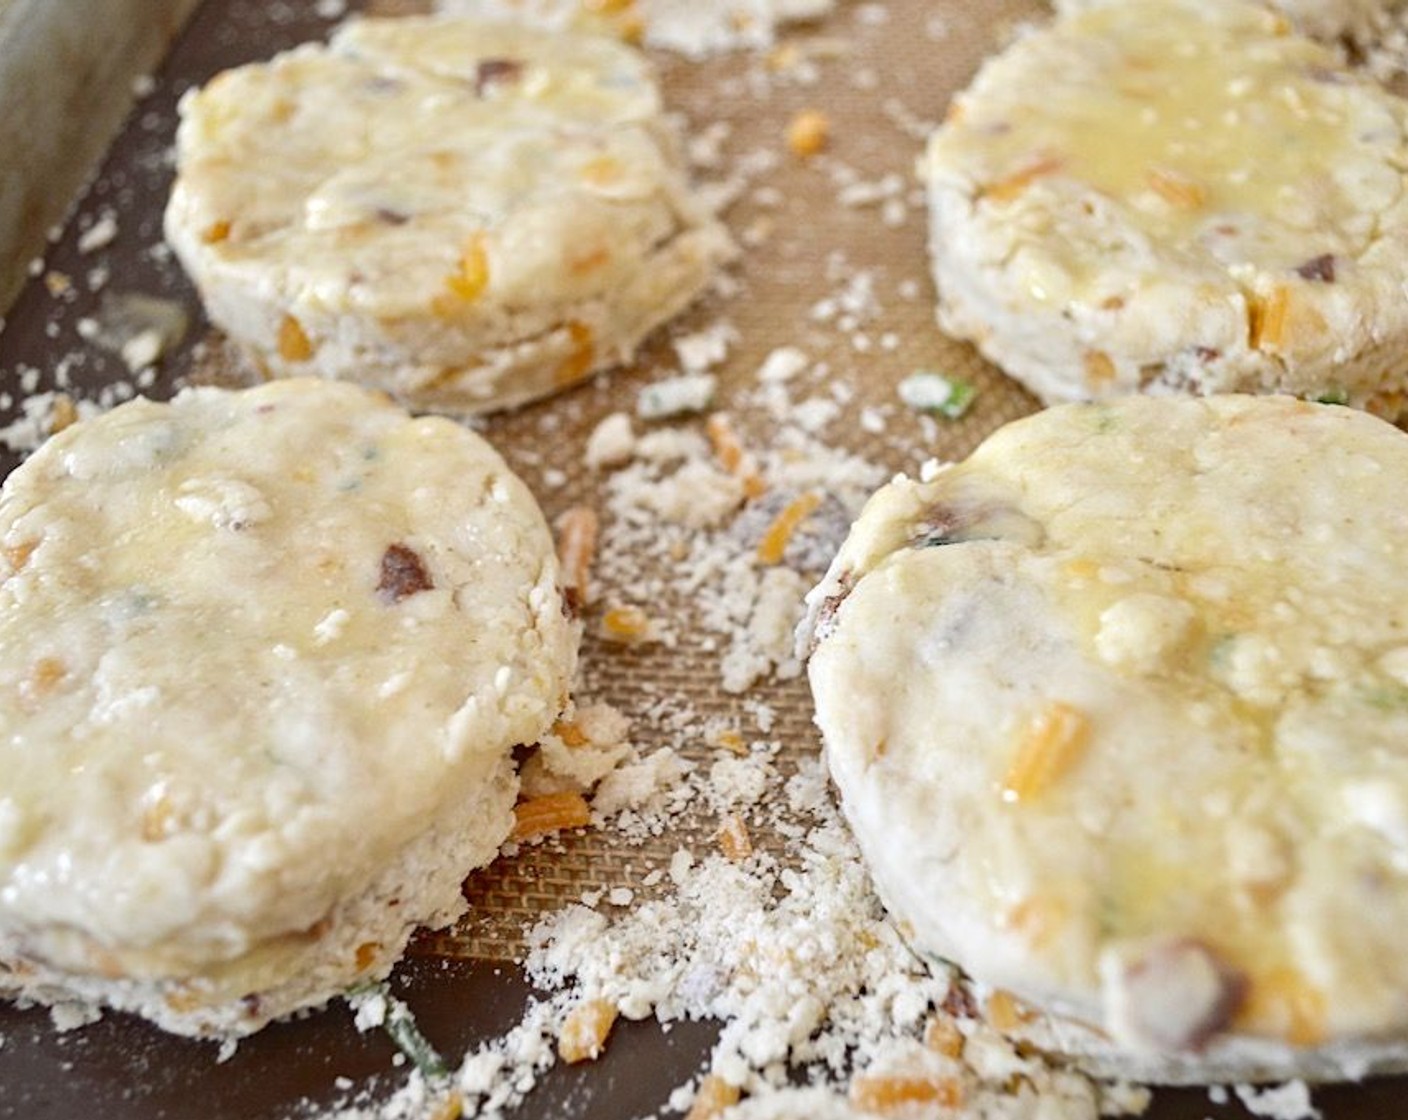 step 5 Bring the mixture together into a ball with floured hands, then press it out into a large disc that is about 1 inch thick. Use a 3 inch biscuit cutter to cut out as many scones as you can get, keeping the cuts close together.